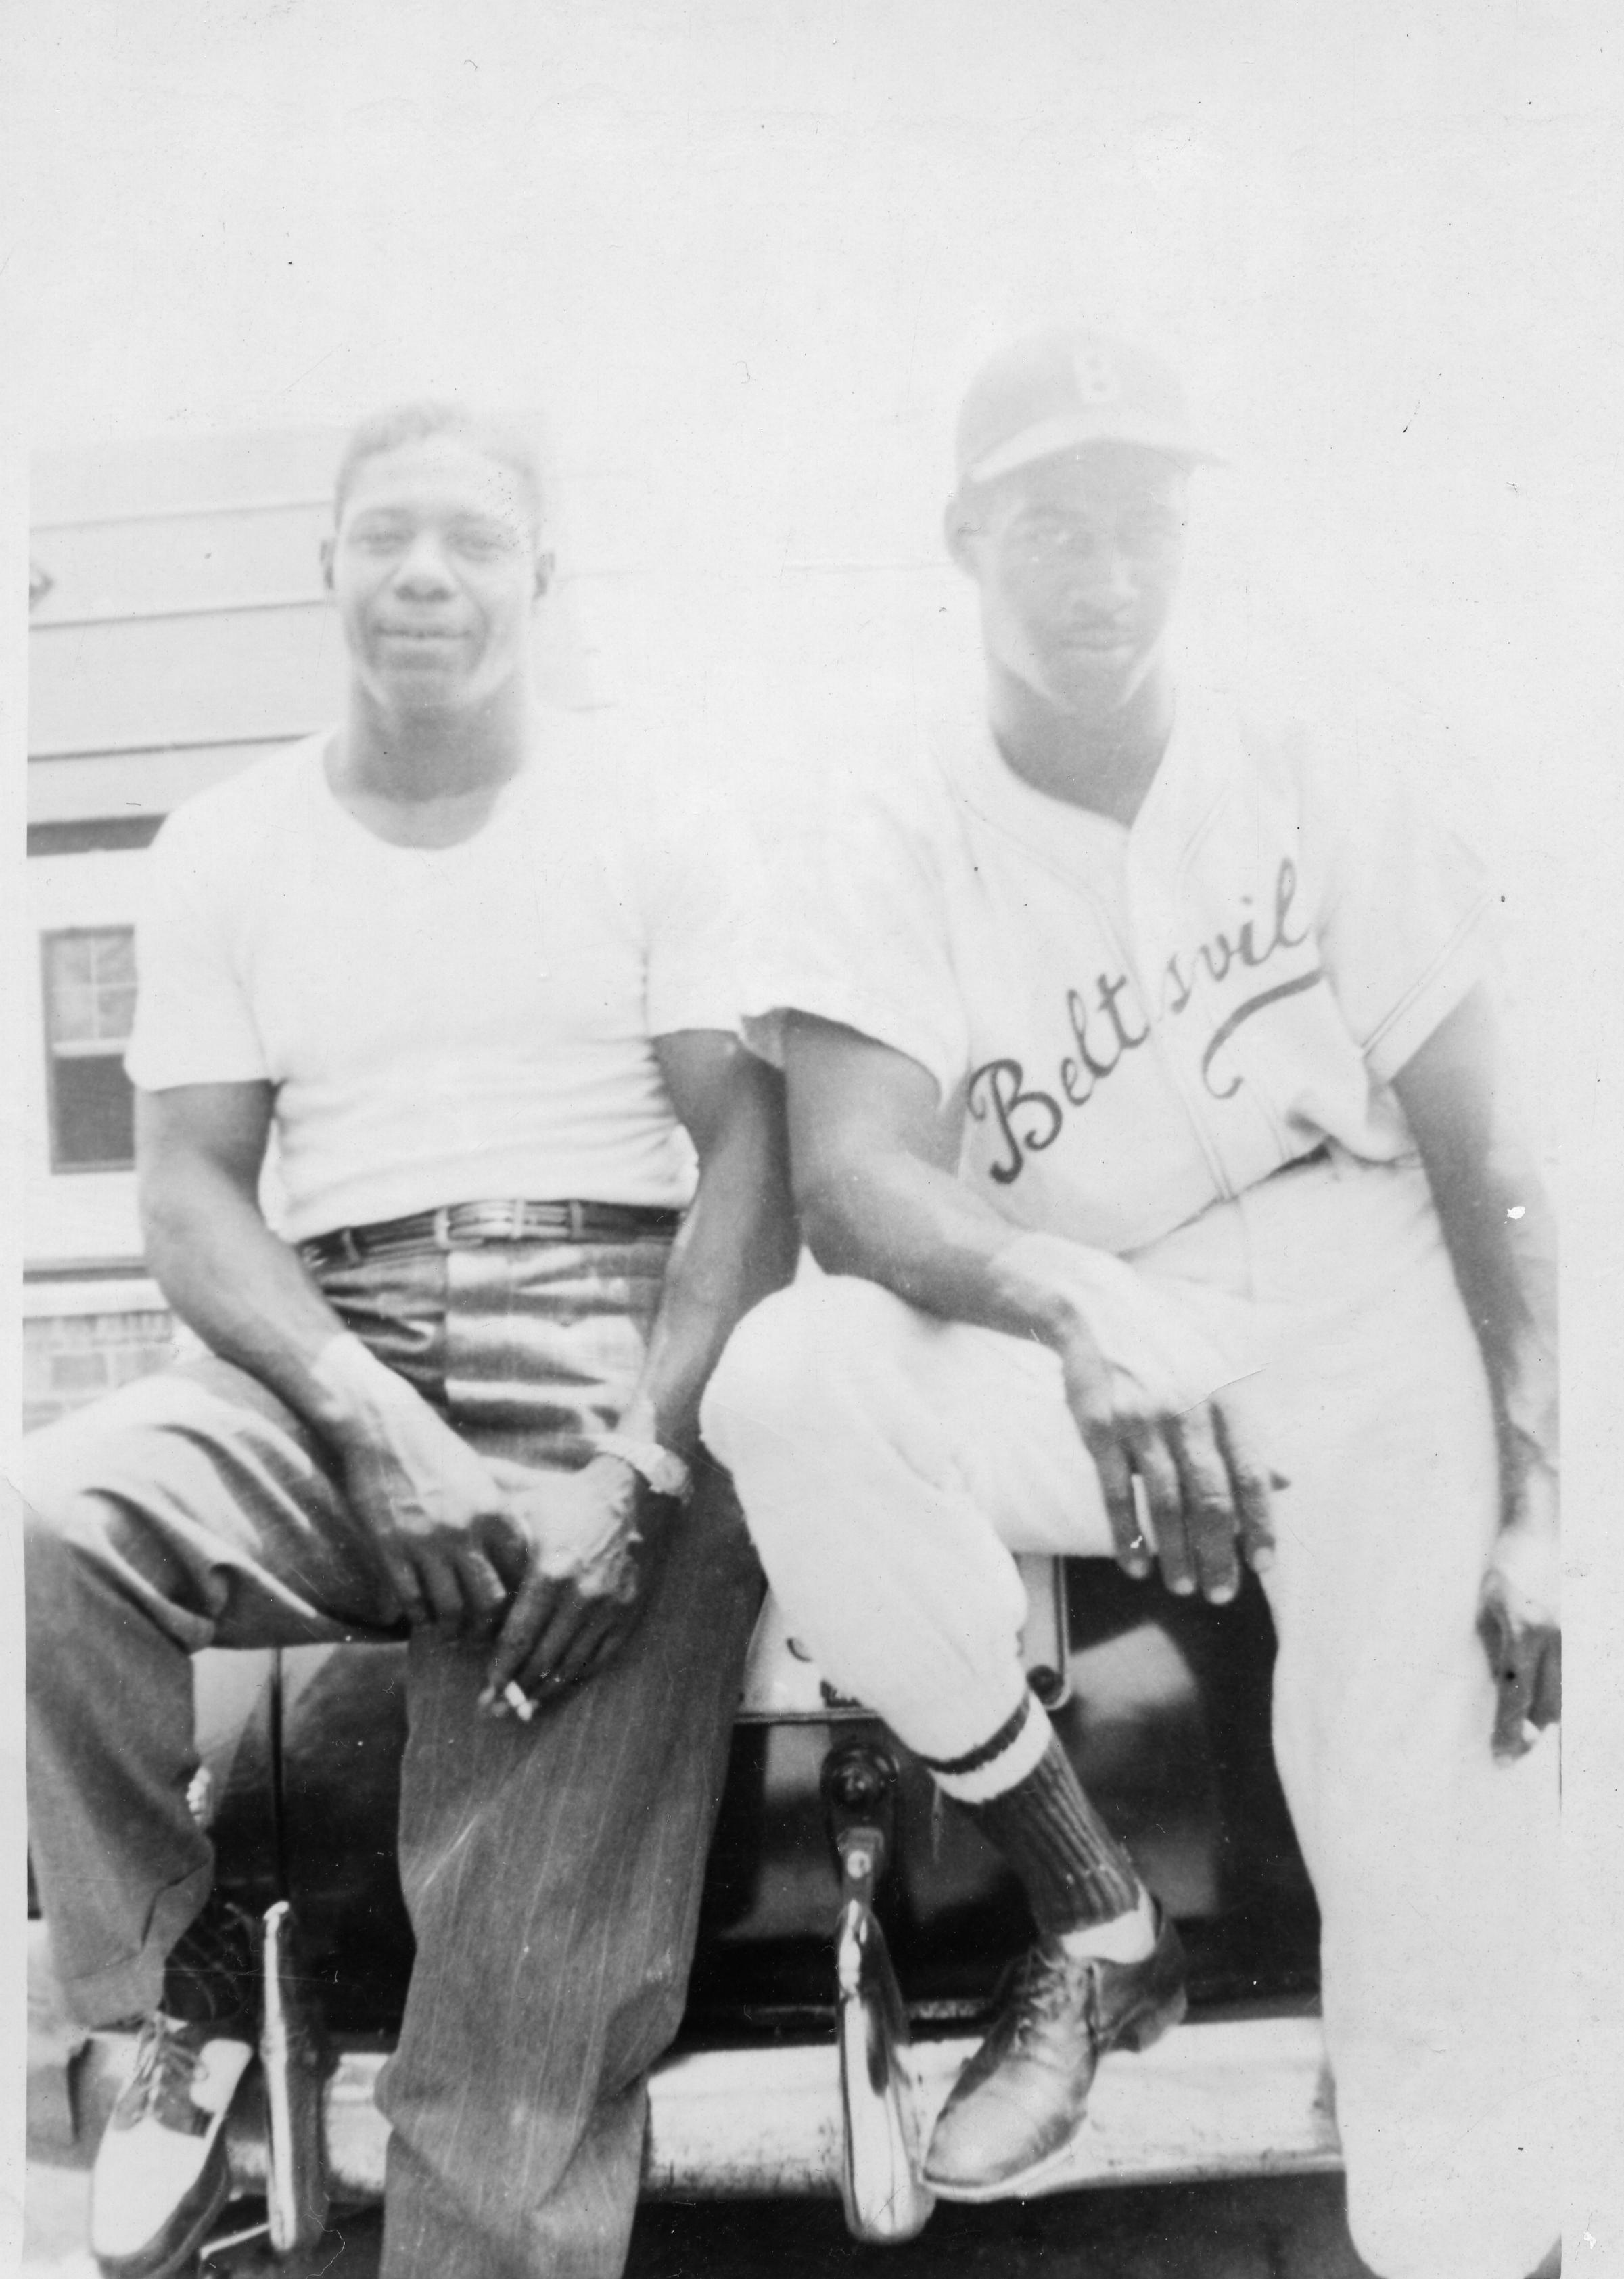 Mr. Lee White and baseball player